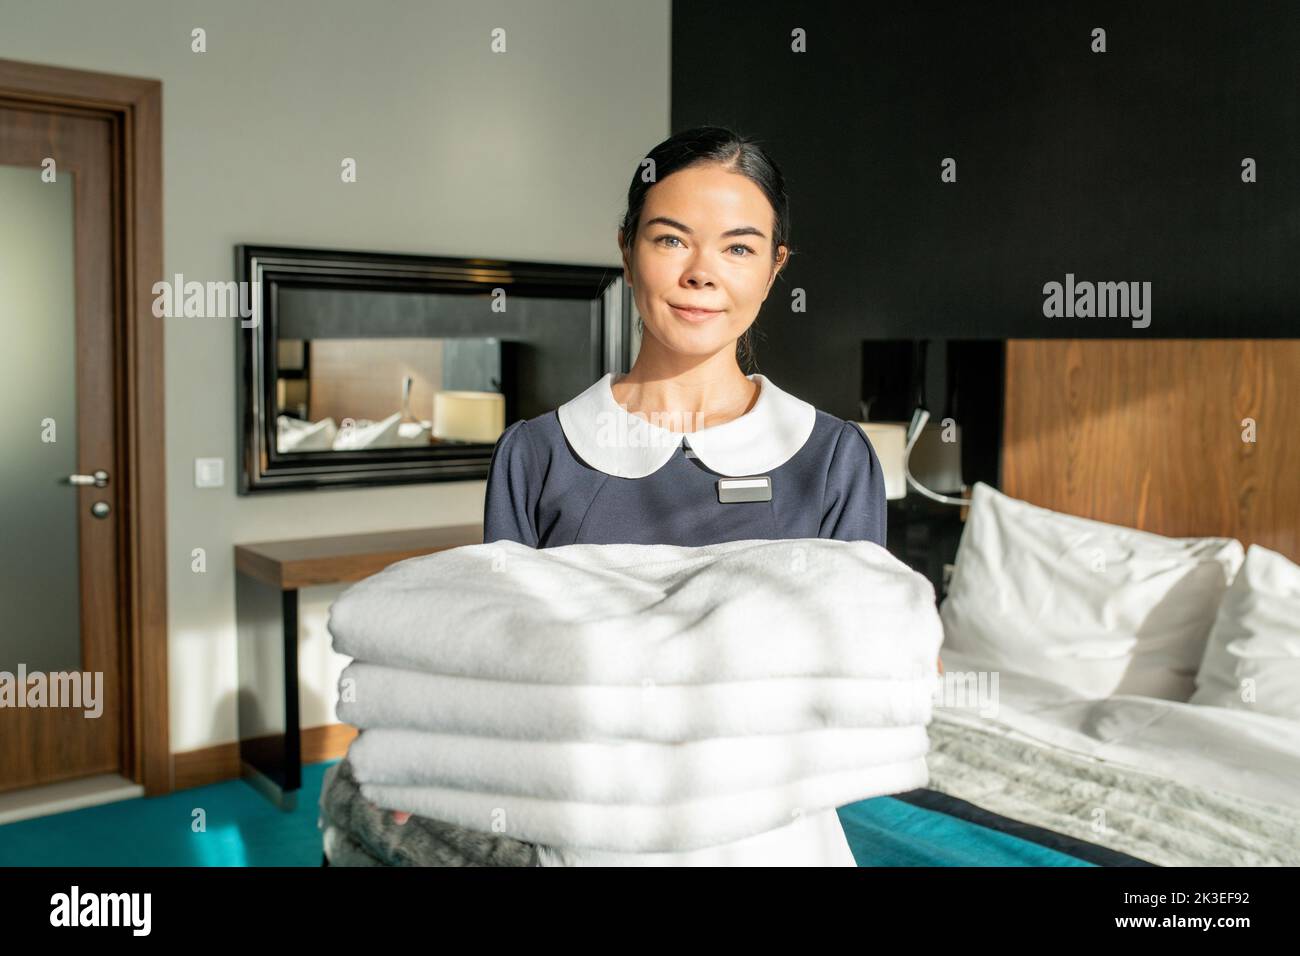 Photo realistic digital collage of happy room service staff holding stack of white clean sheets in bedroom Stock Photo